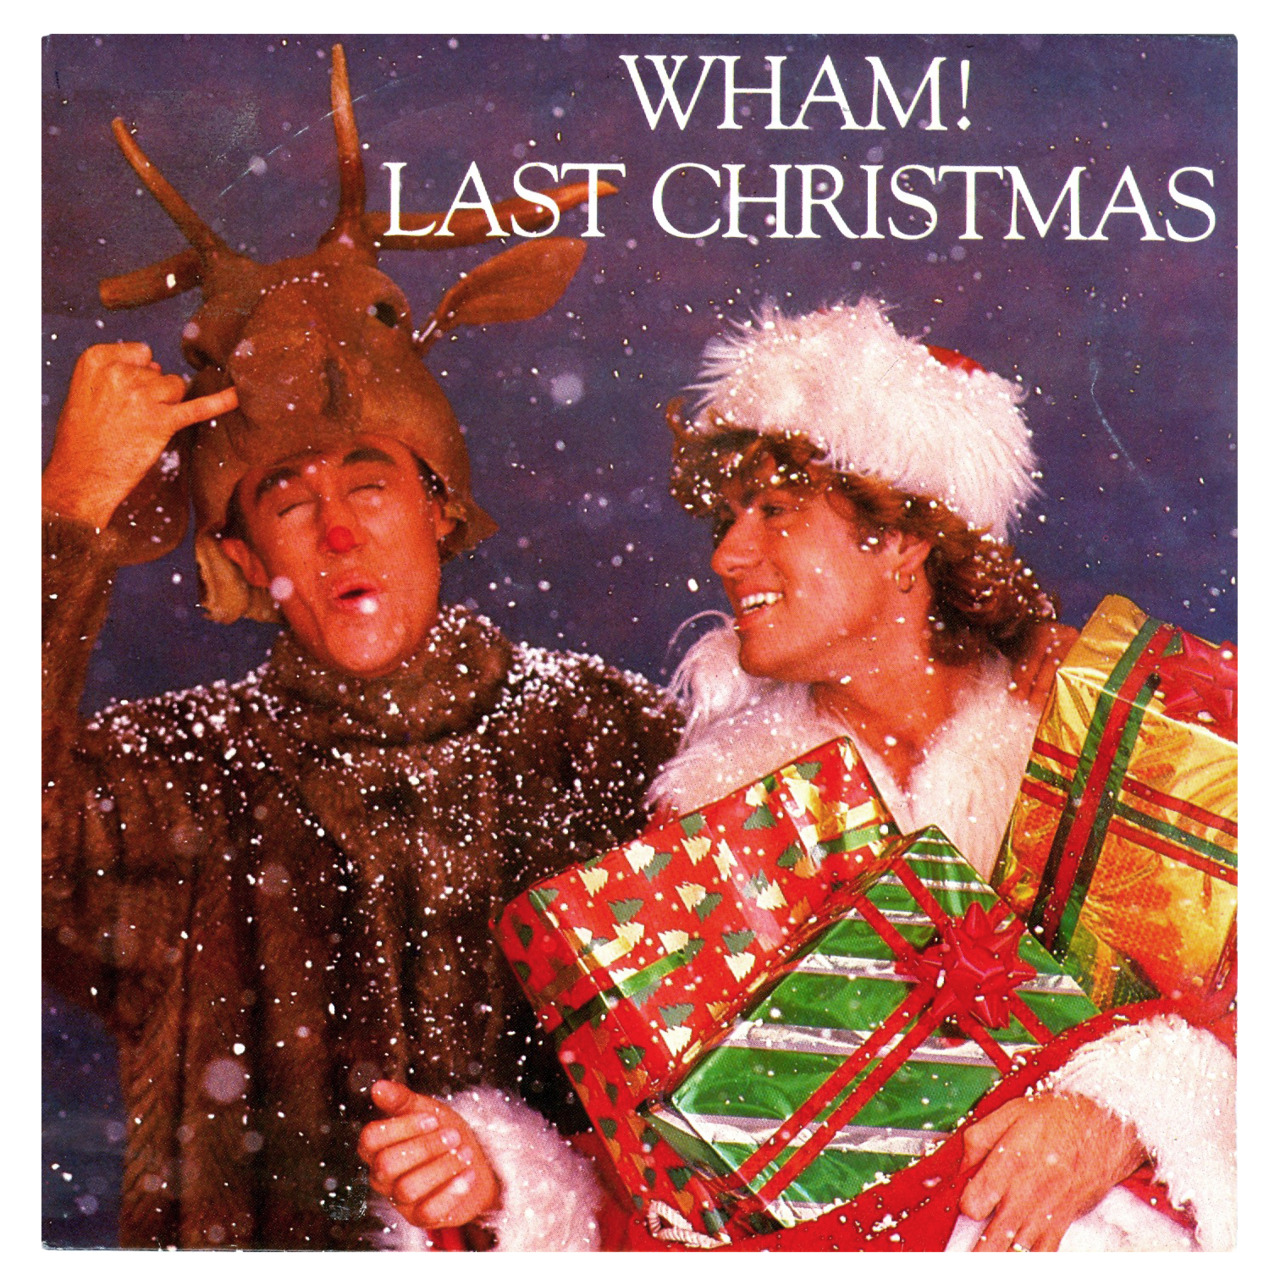 The cover of the single for Wham! Last Christmas